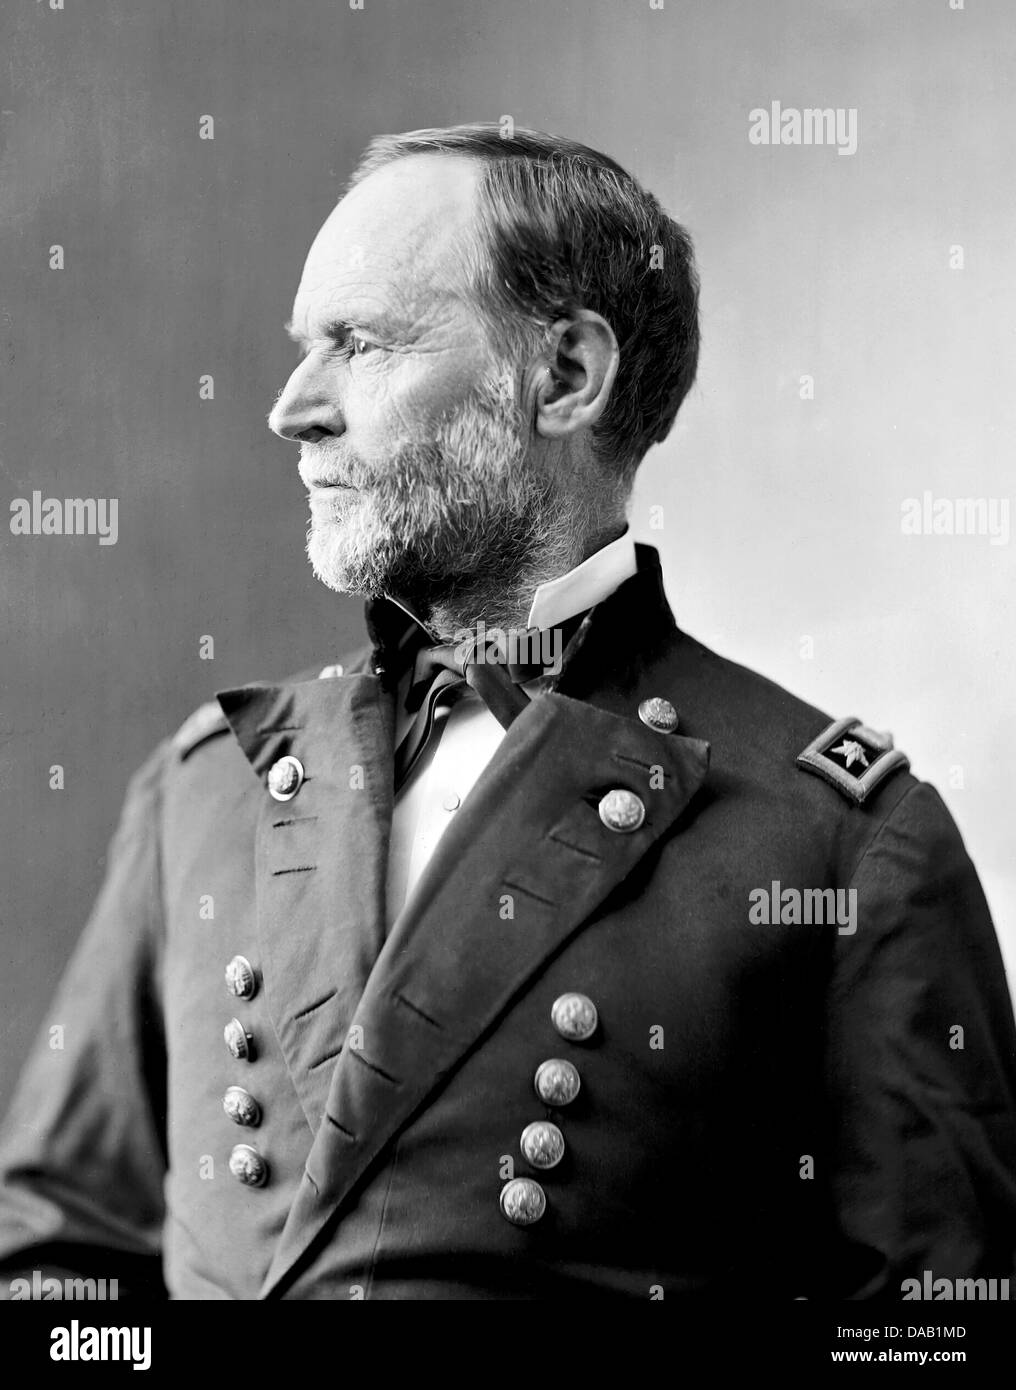 WILLIAM TECUMSEH SHERMAN (1820-1891)  American soldier who served as a Union Army General in the Civil War. Stock Photo